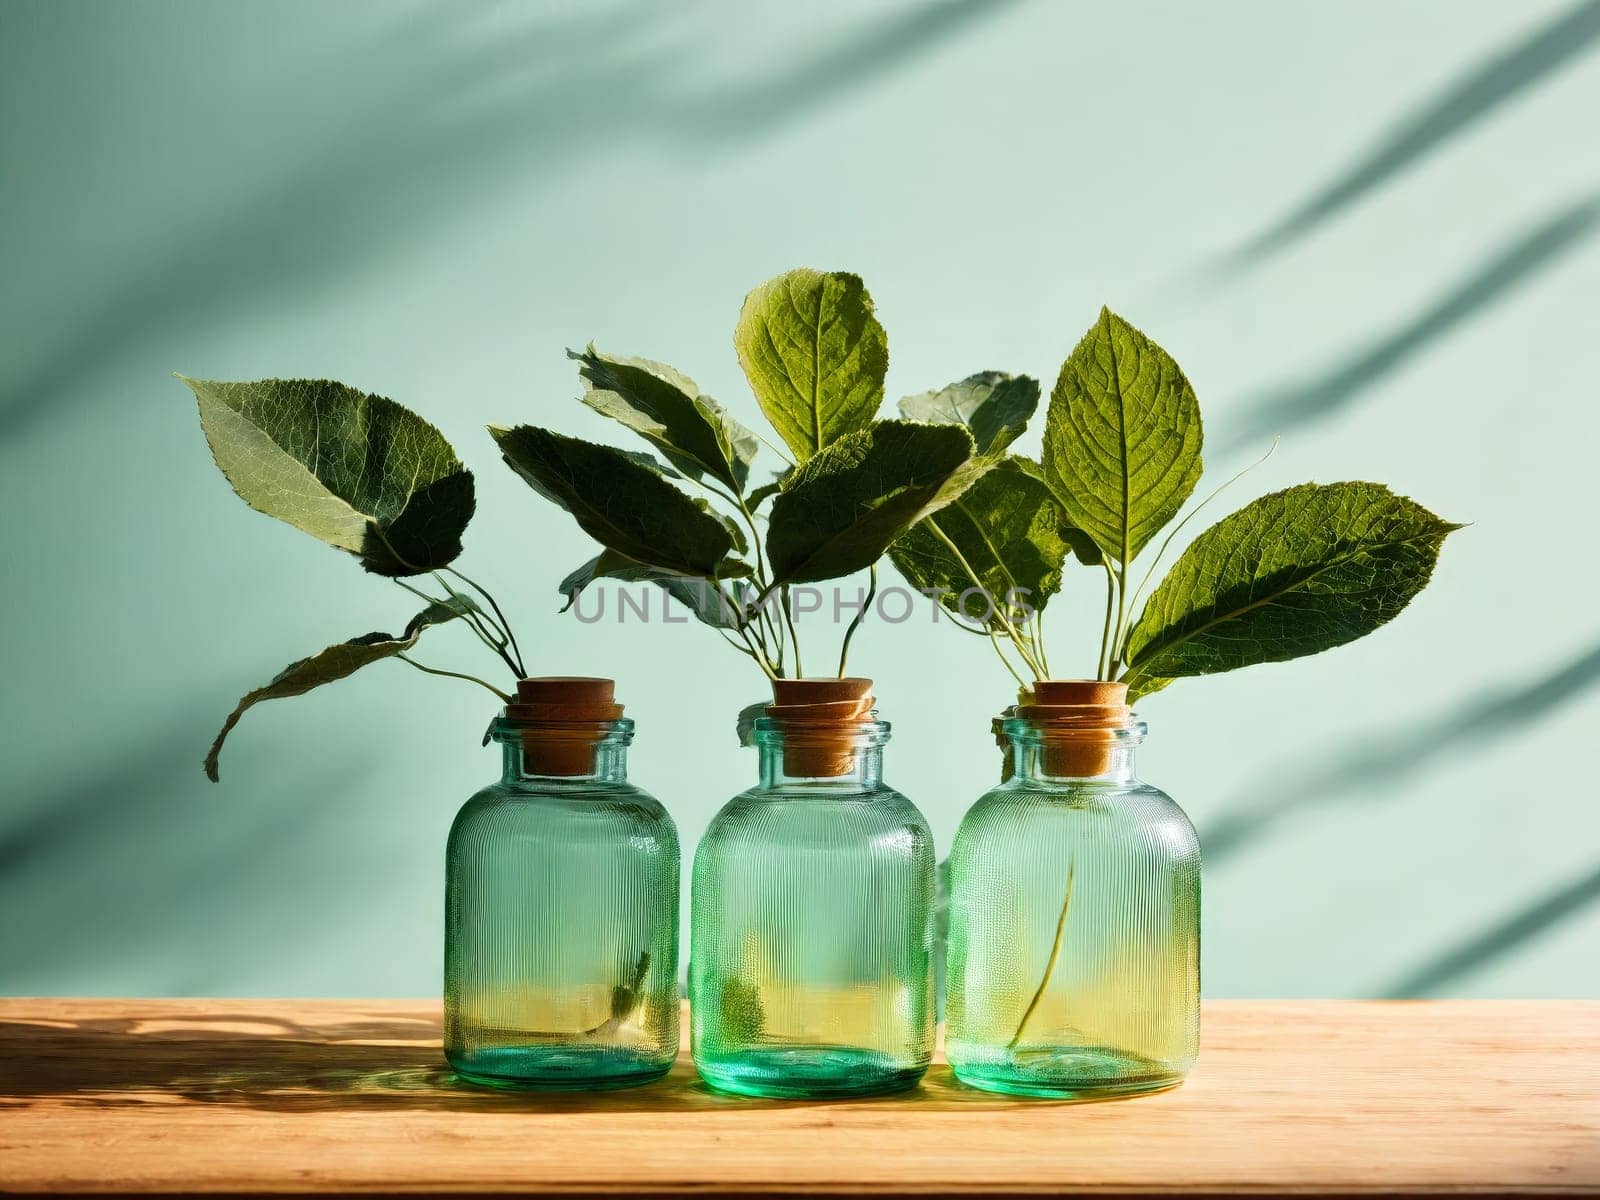 Minimalist skincare packaging apothecary jars green leaves light wood table diffused natural lighting by panophotograph